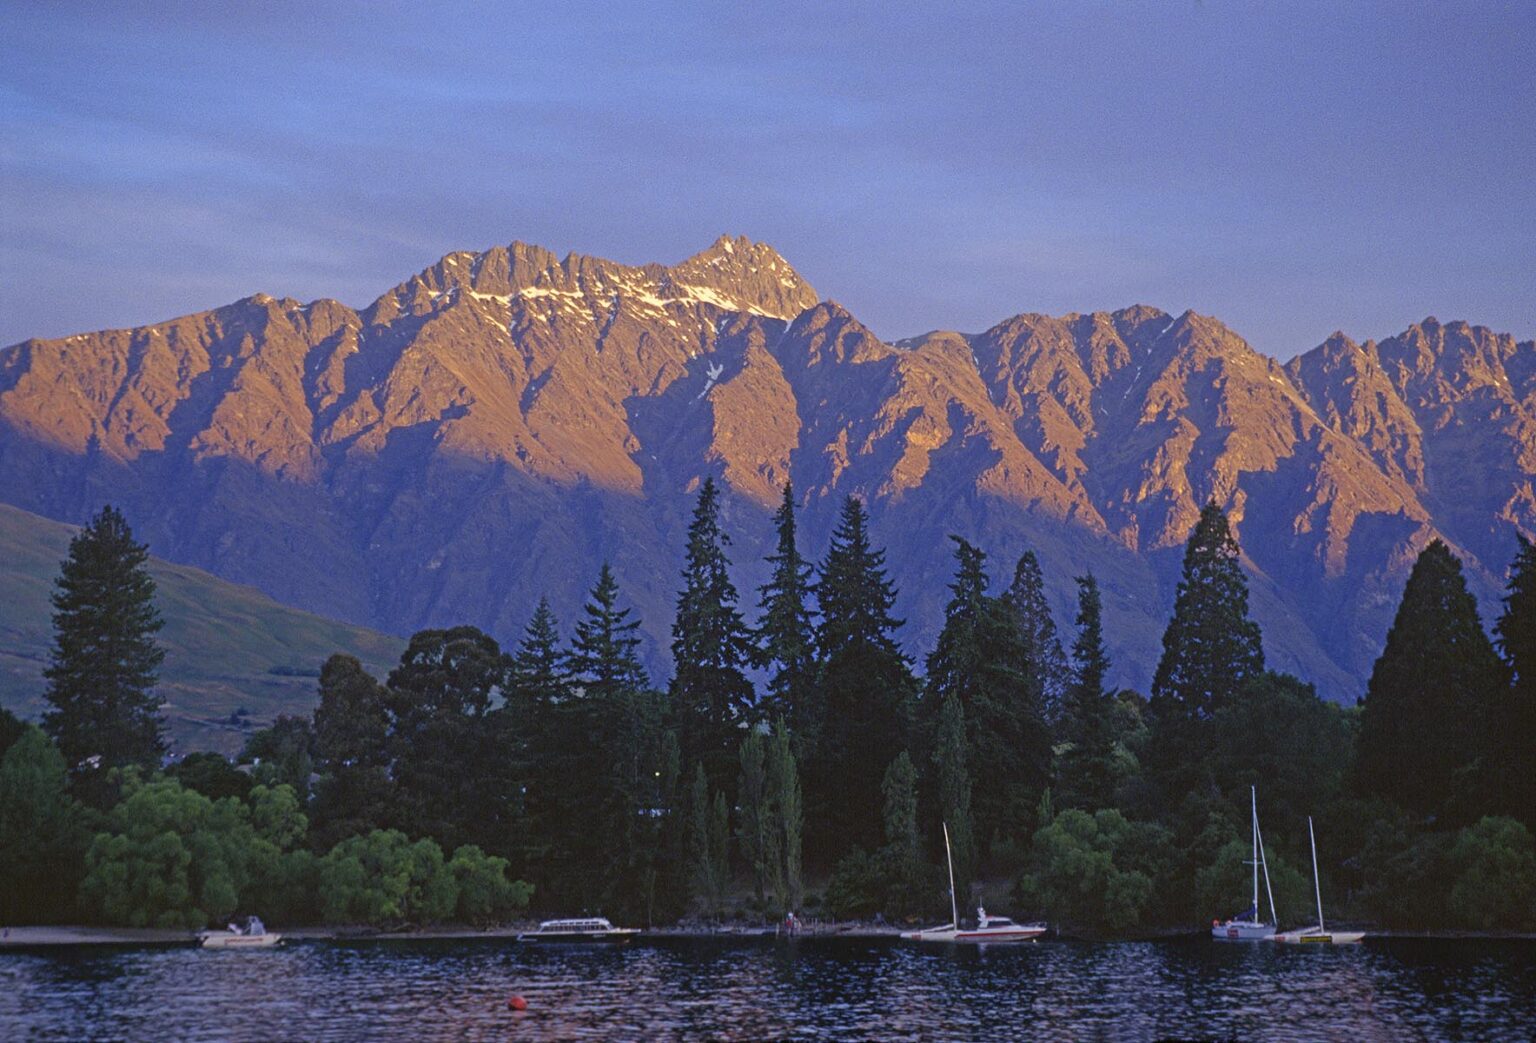 The sunsets on the Remarkables and Lake Wakatipu in Queenstown - South Island, New Zealand